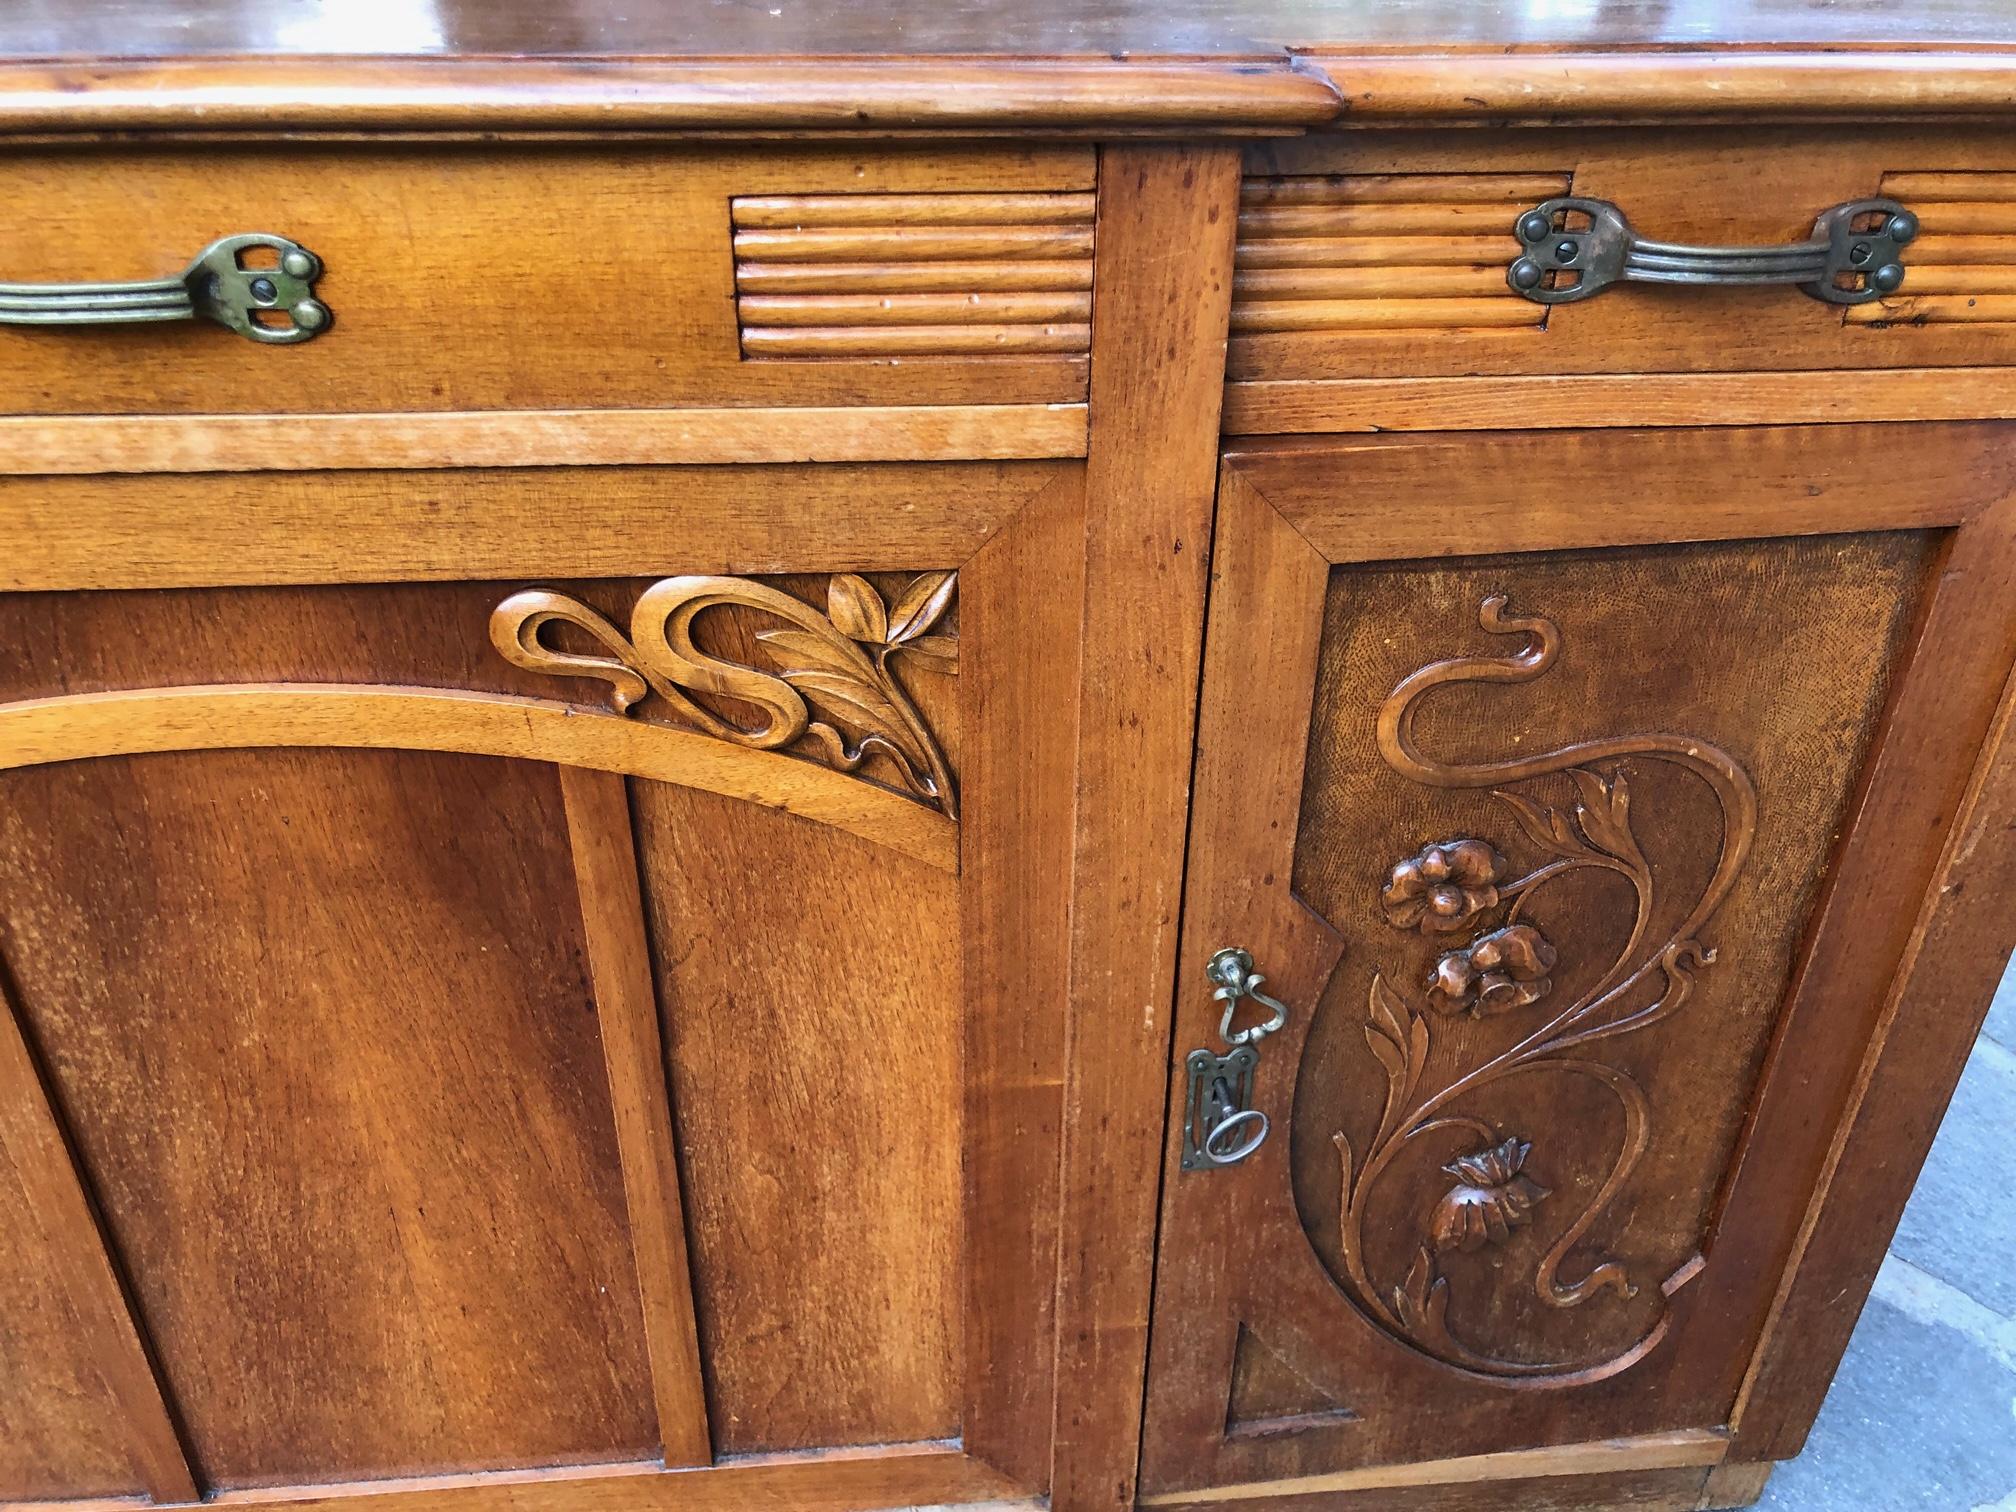 Original Italian Art Noveau Sideboard in Honey-Colored Walnut with Three Drawers For Sale 7